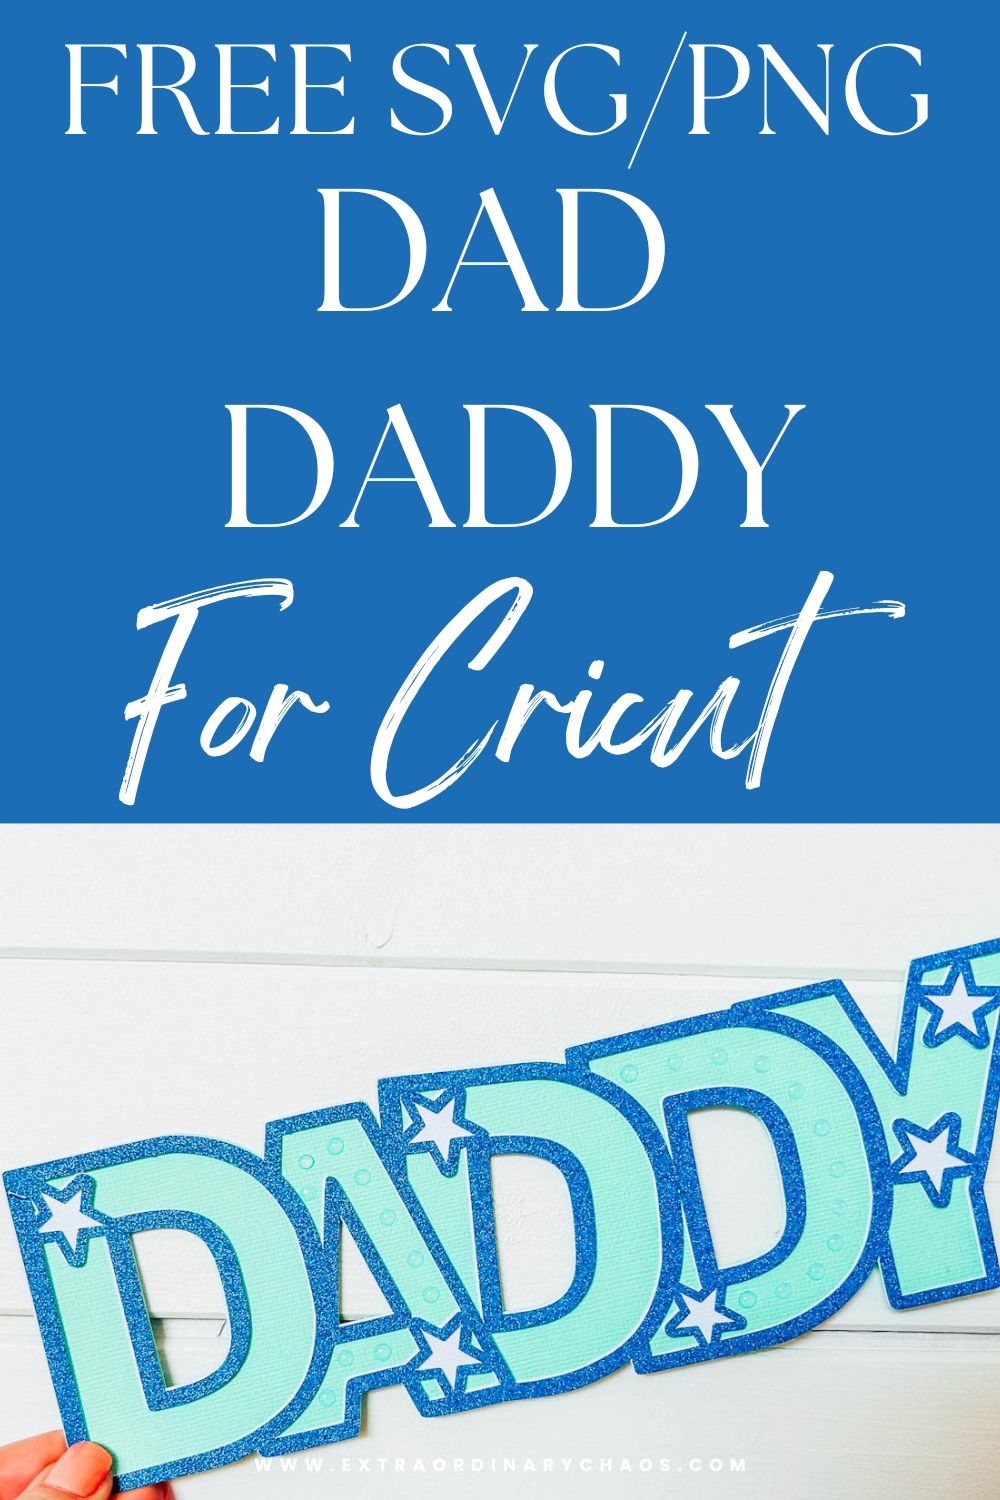 Free Layered Dad, Daddy File for Cricut and Silhouette